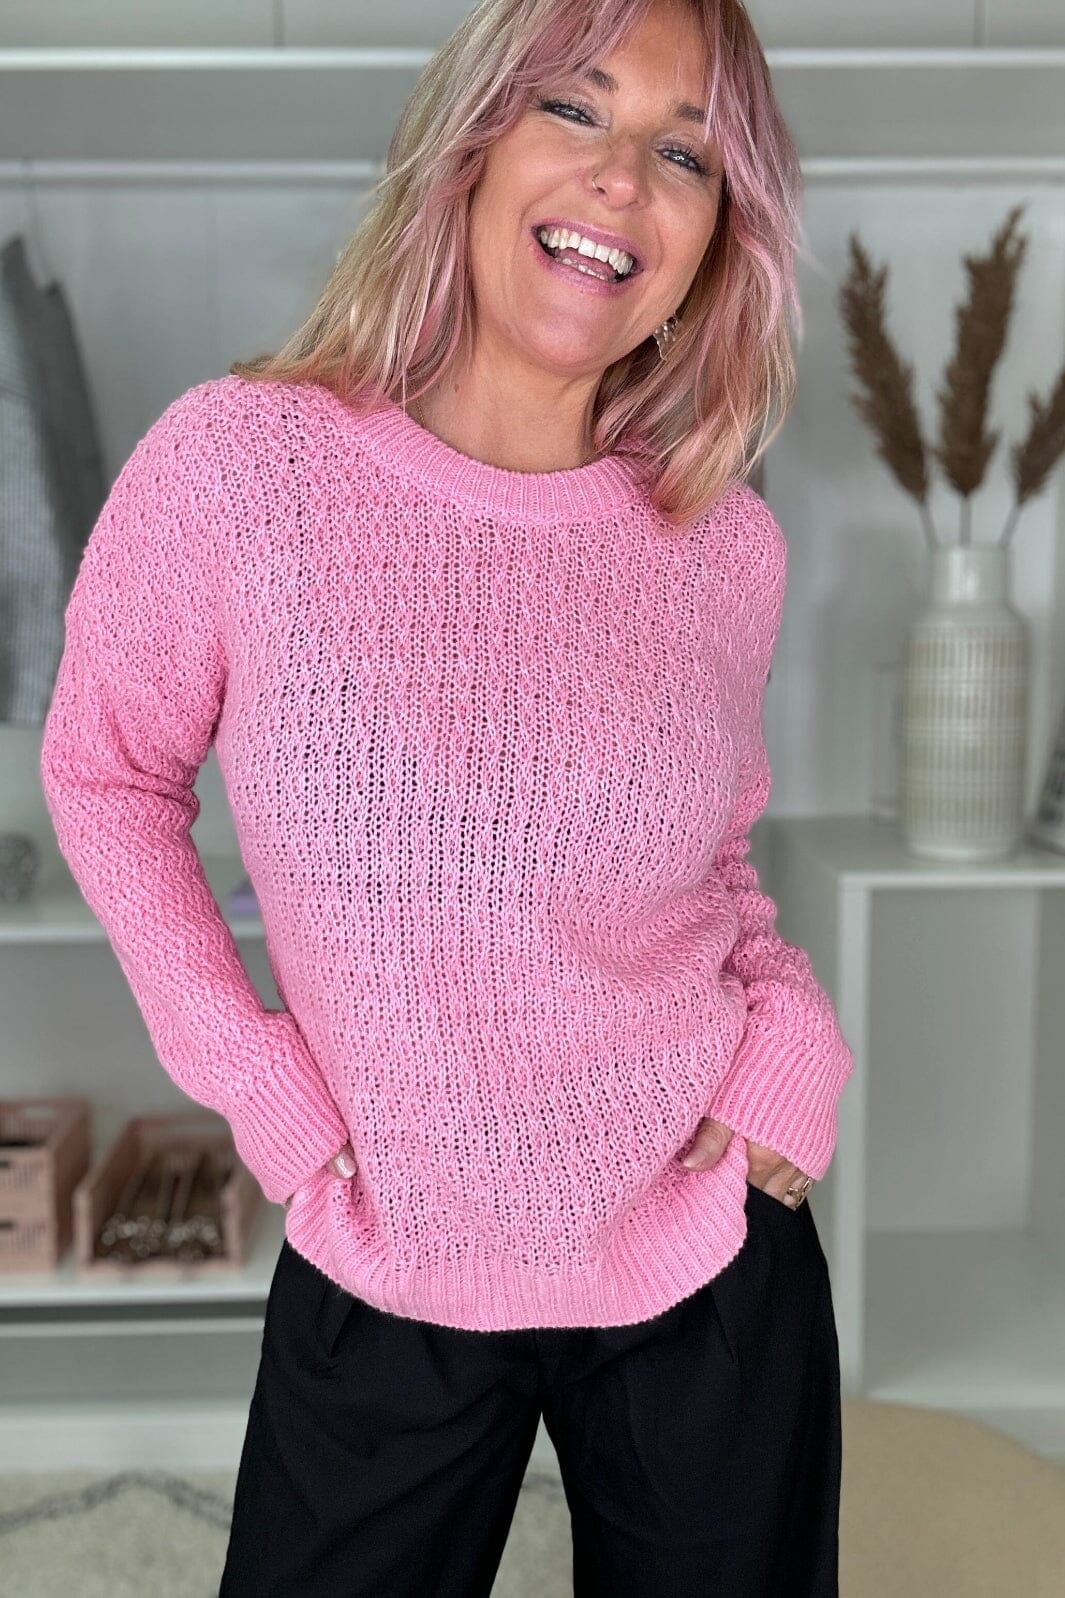 A-bee - Blouse P2061 - Pink Strikbluser 